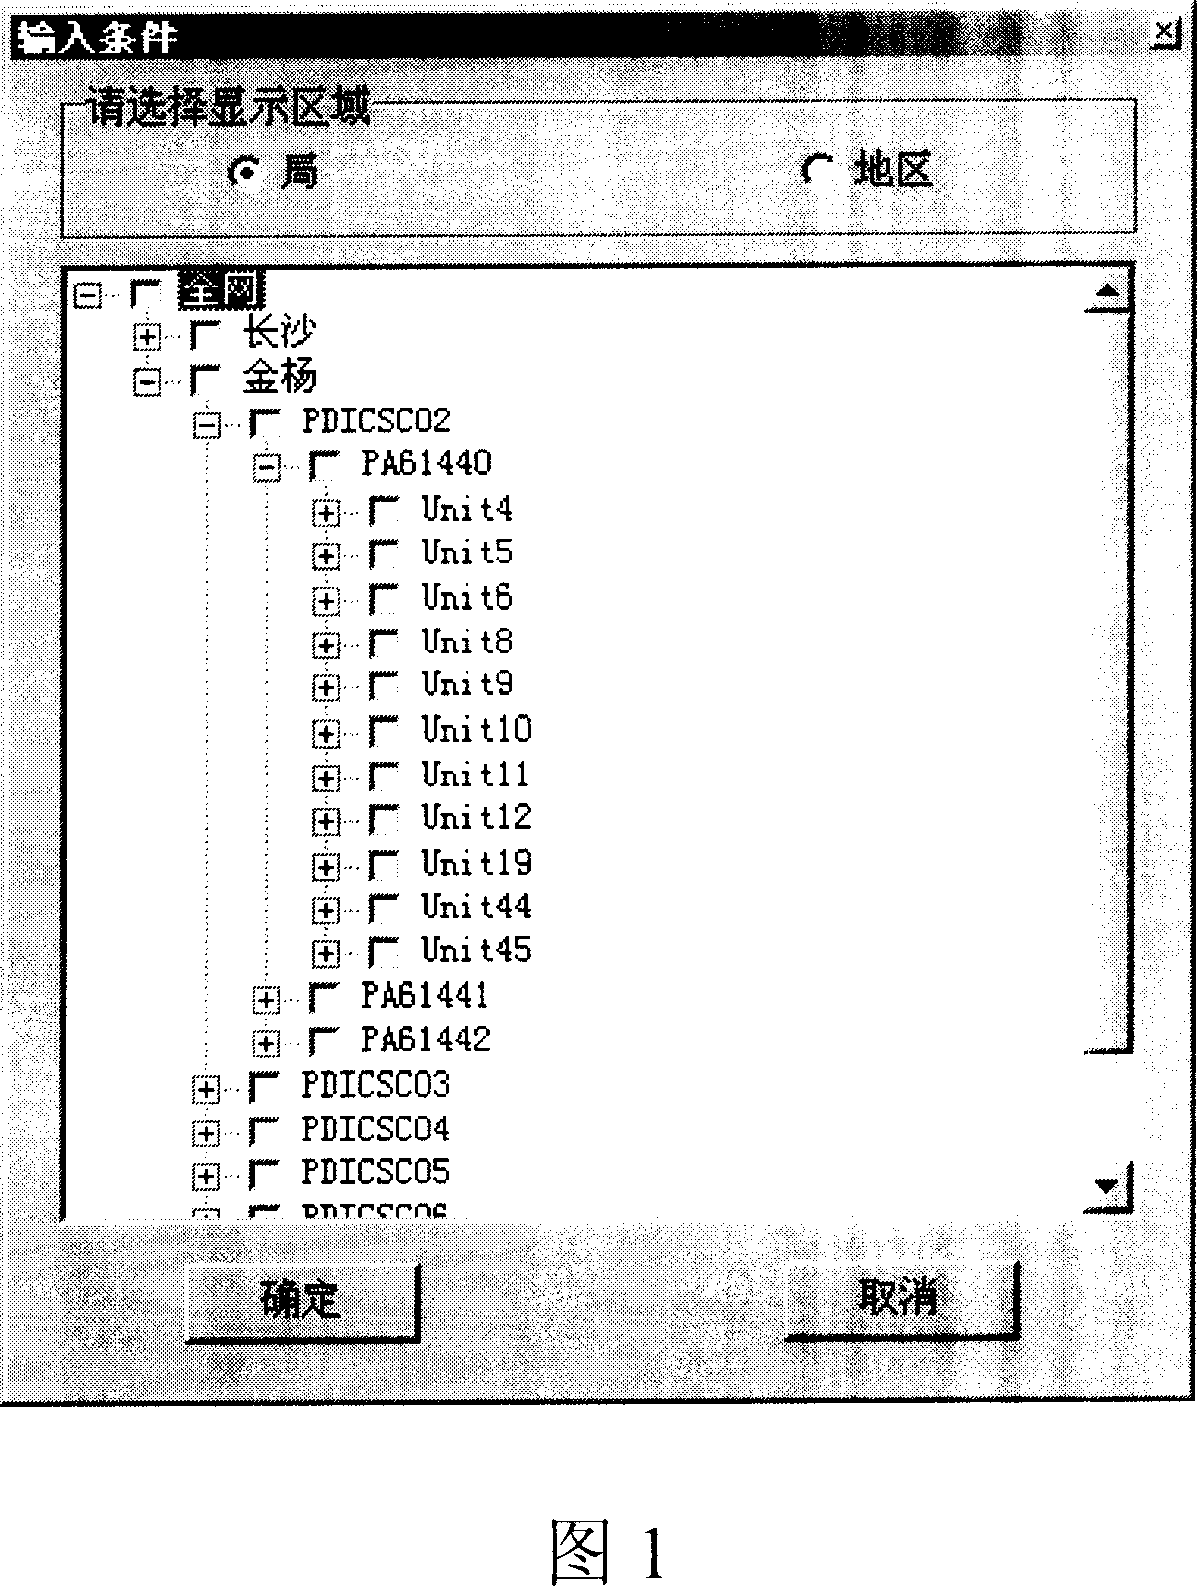 Tri-state tree representing and location method of network element object in network optimization system